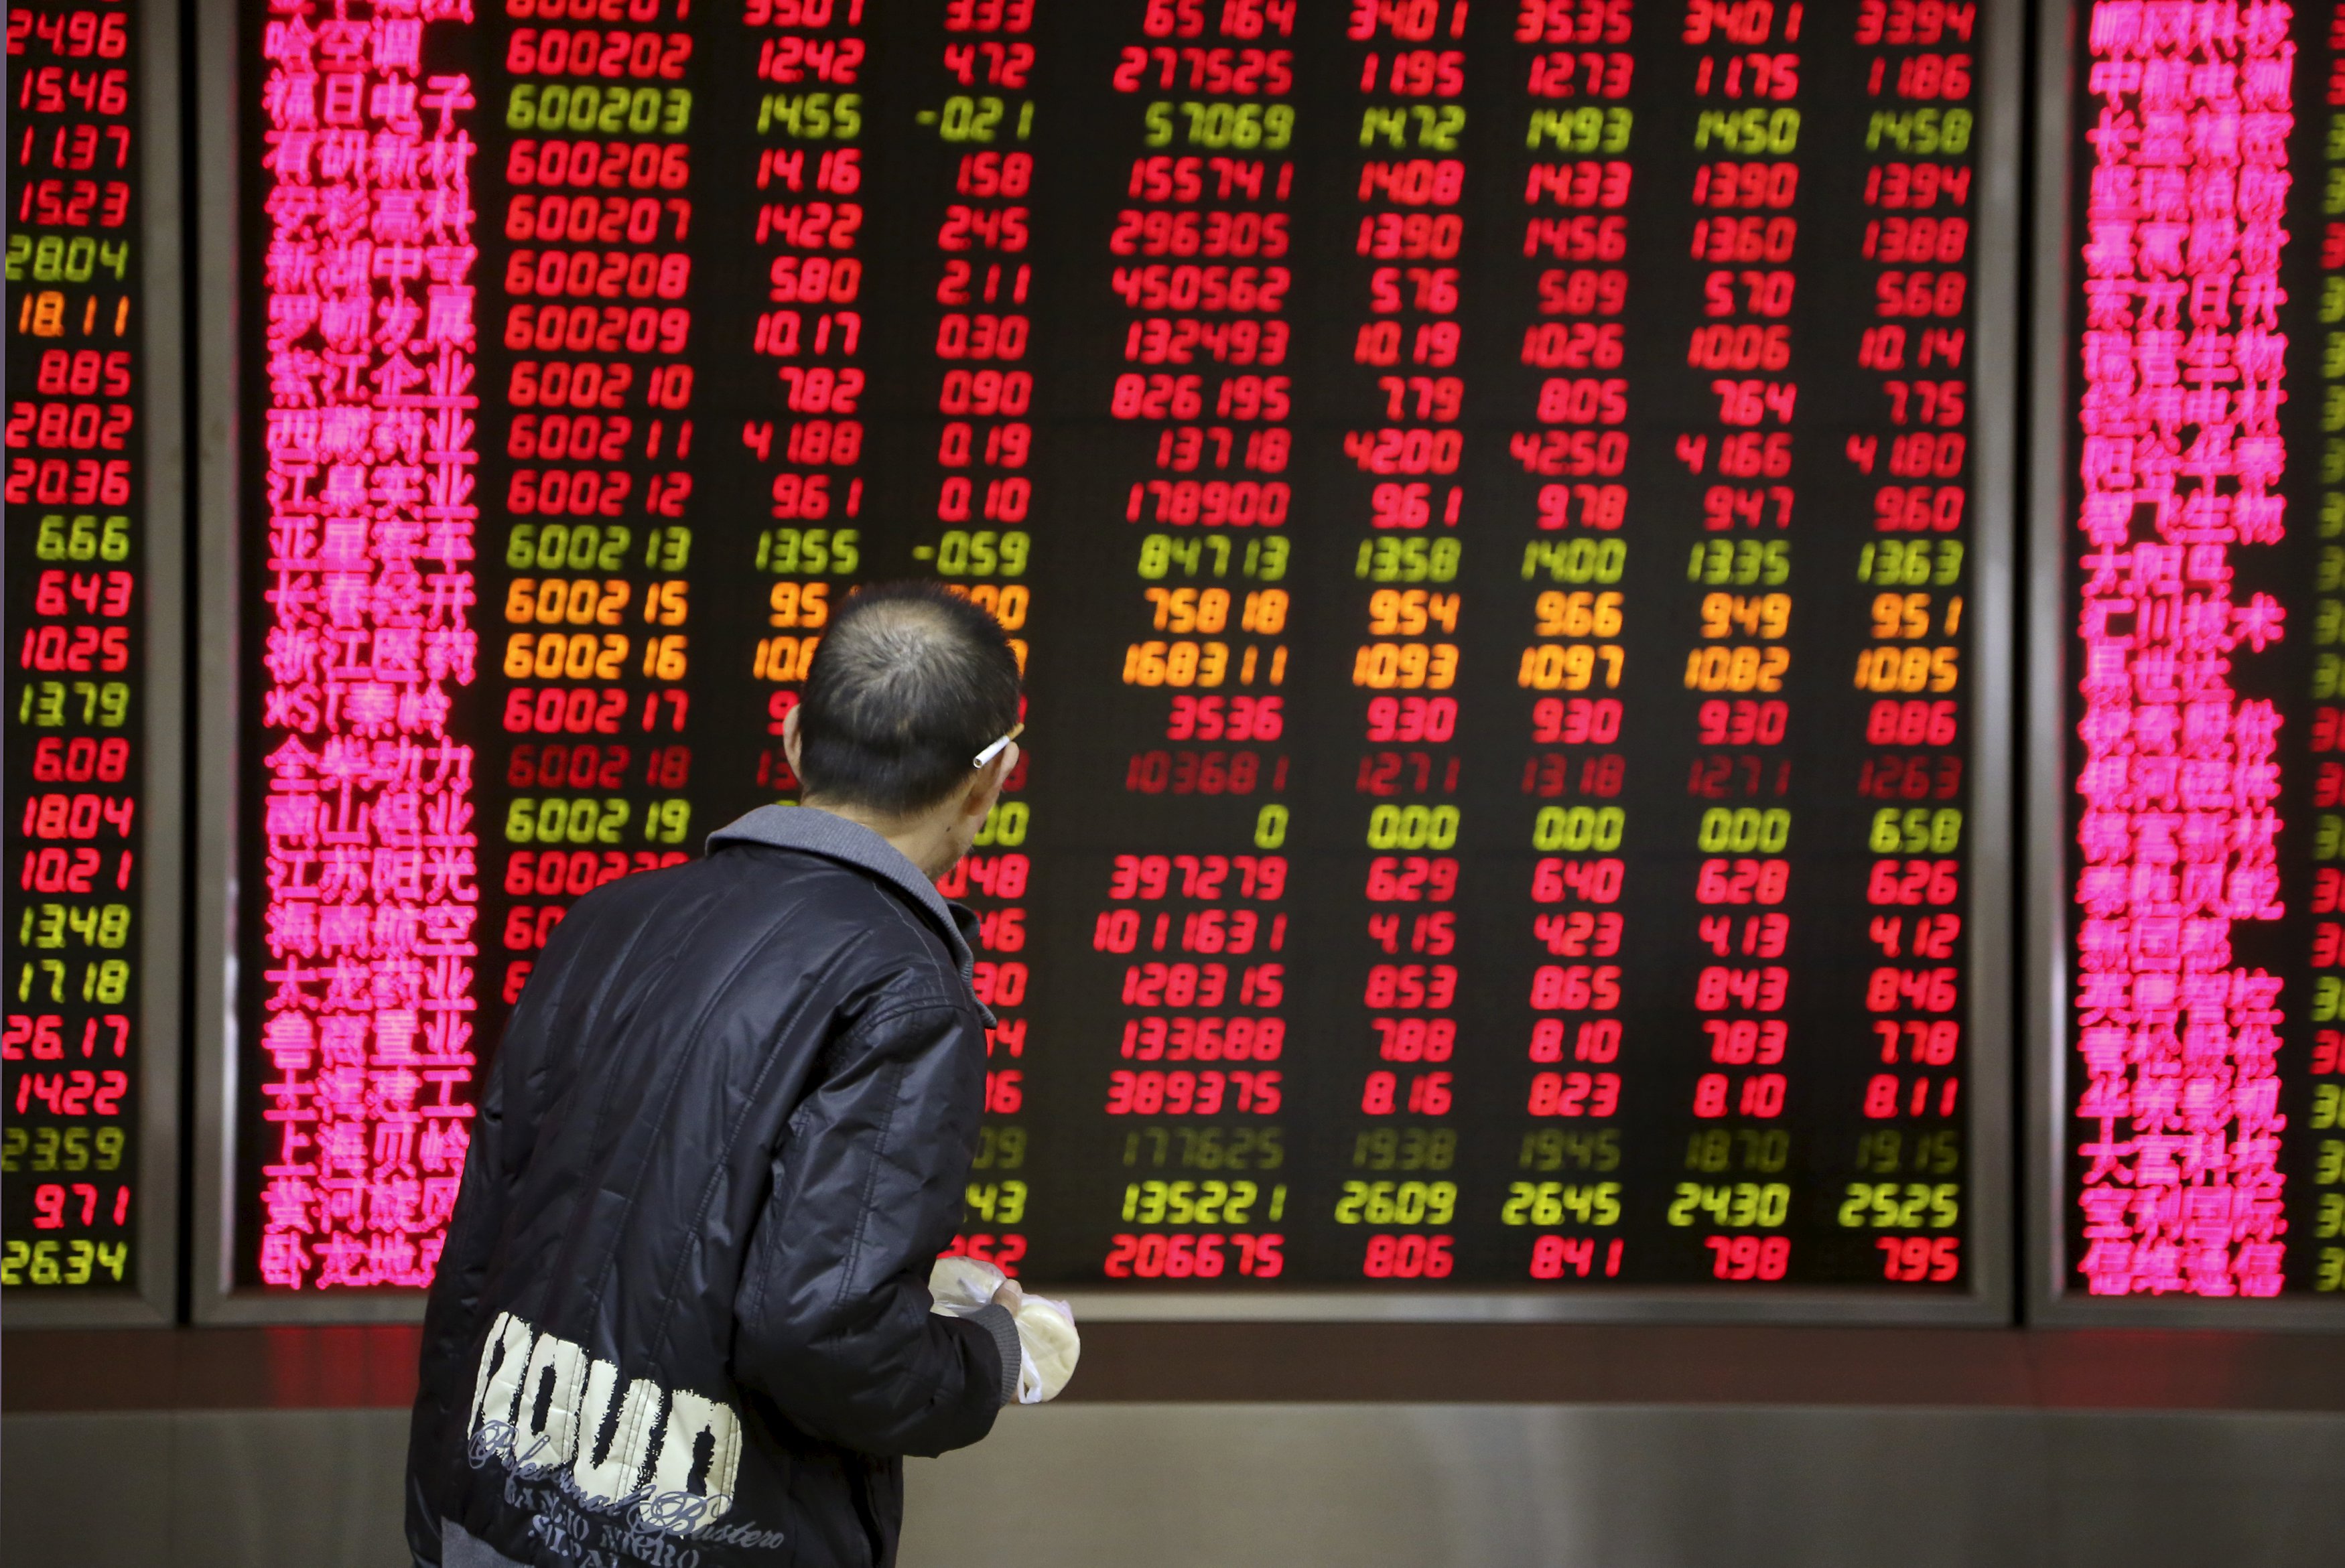 An investor walks past in front of an electronic board showing stock information at a brokerage house in Beijing, China, November 17, 2015. After a solid performance in morning trade, China stocks lost momentum and ended Tuesday flat as small caps slumped on profit-taking, reflecting how market sentiment remained fragile. REUTERS/Li Sanxian CHINA OUT. NO COMMERCIAL OR EDITORIAL SALES IN CHINA